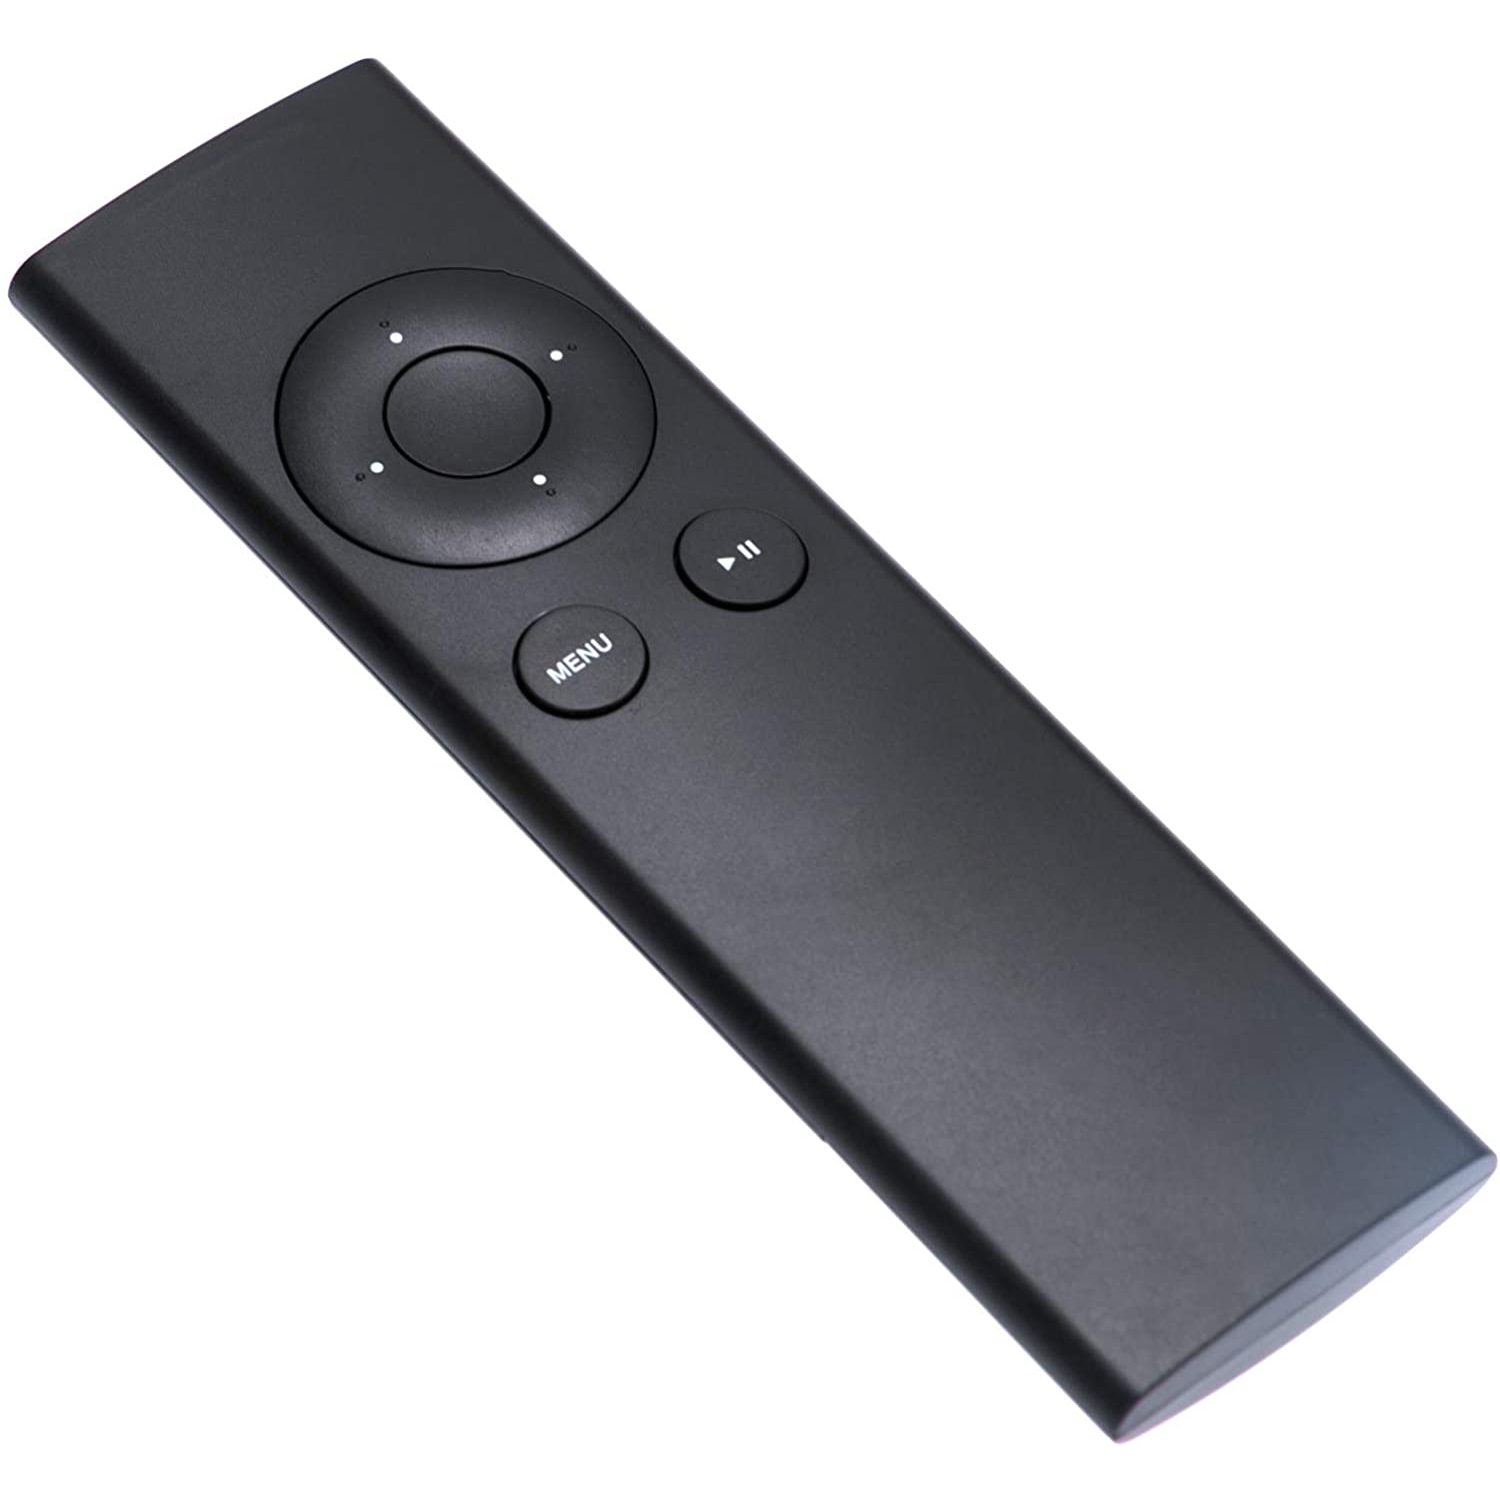 New MC377LL/A Replace Remote Control fit for Apple TV 2 3 Box MC377LL MC377LLA A1156 A1469 A1427 A1378 A1294 Mac Music System MD199LL/A MC572LL/A MM4T2AM/A MM4T2ZM/A